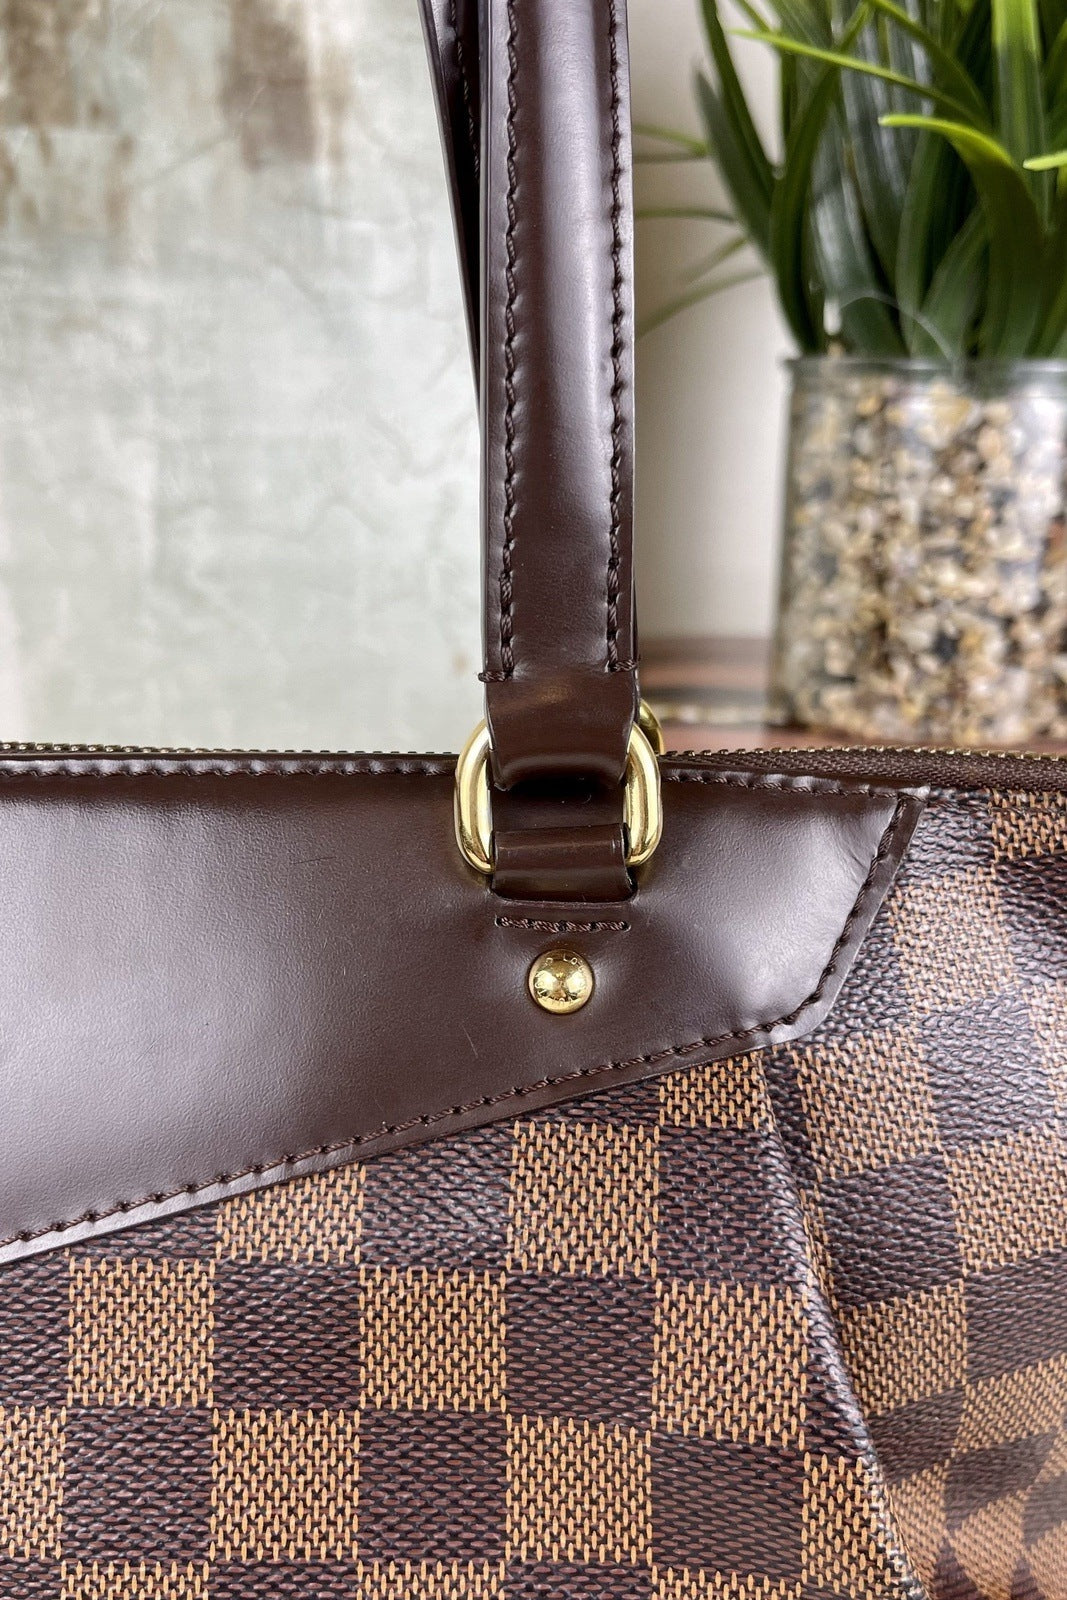 lv westminster size